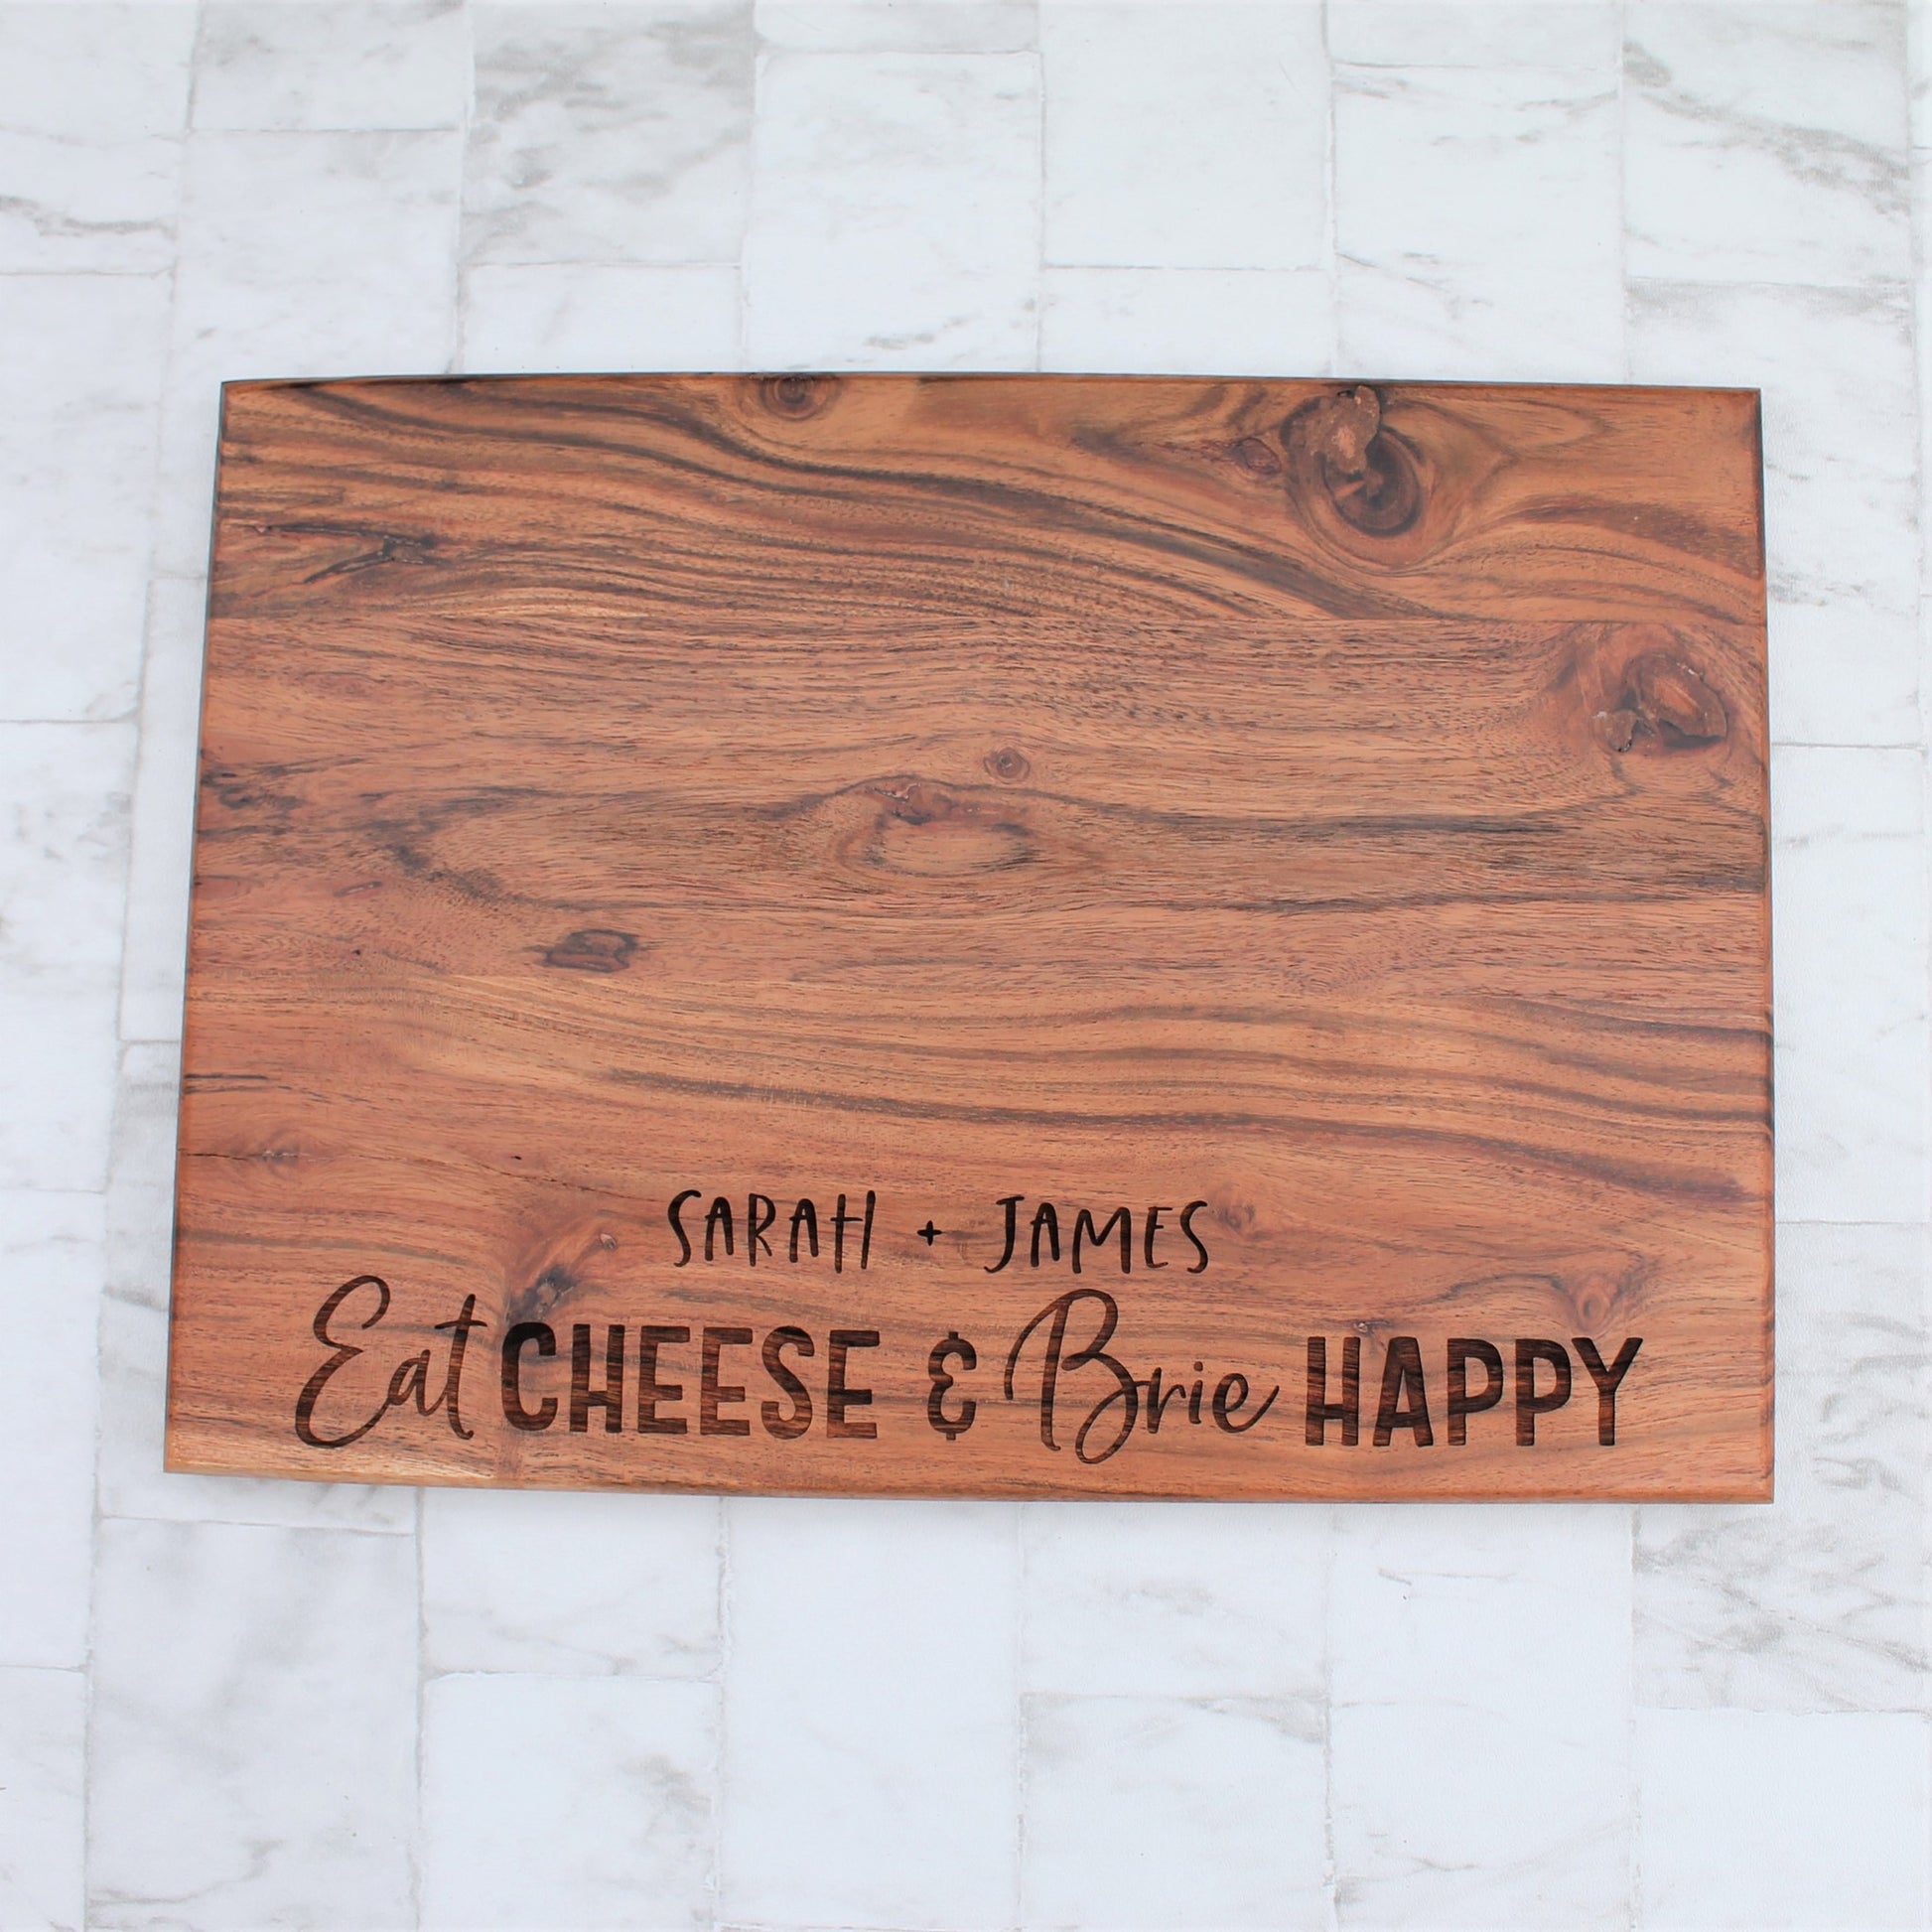 Personalised chopping board for cheese lovers. Engraved with the words eat cheese and brie happy